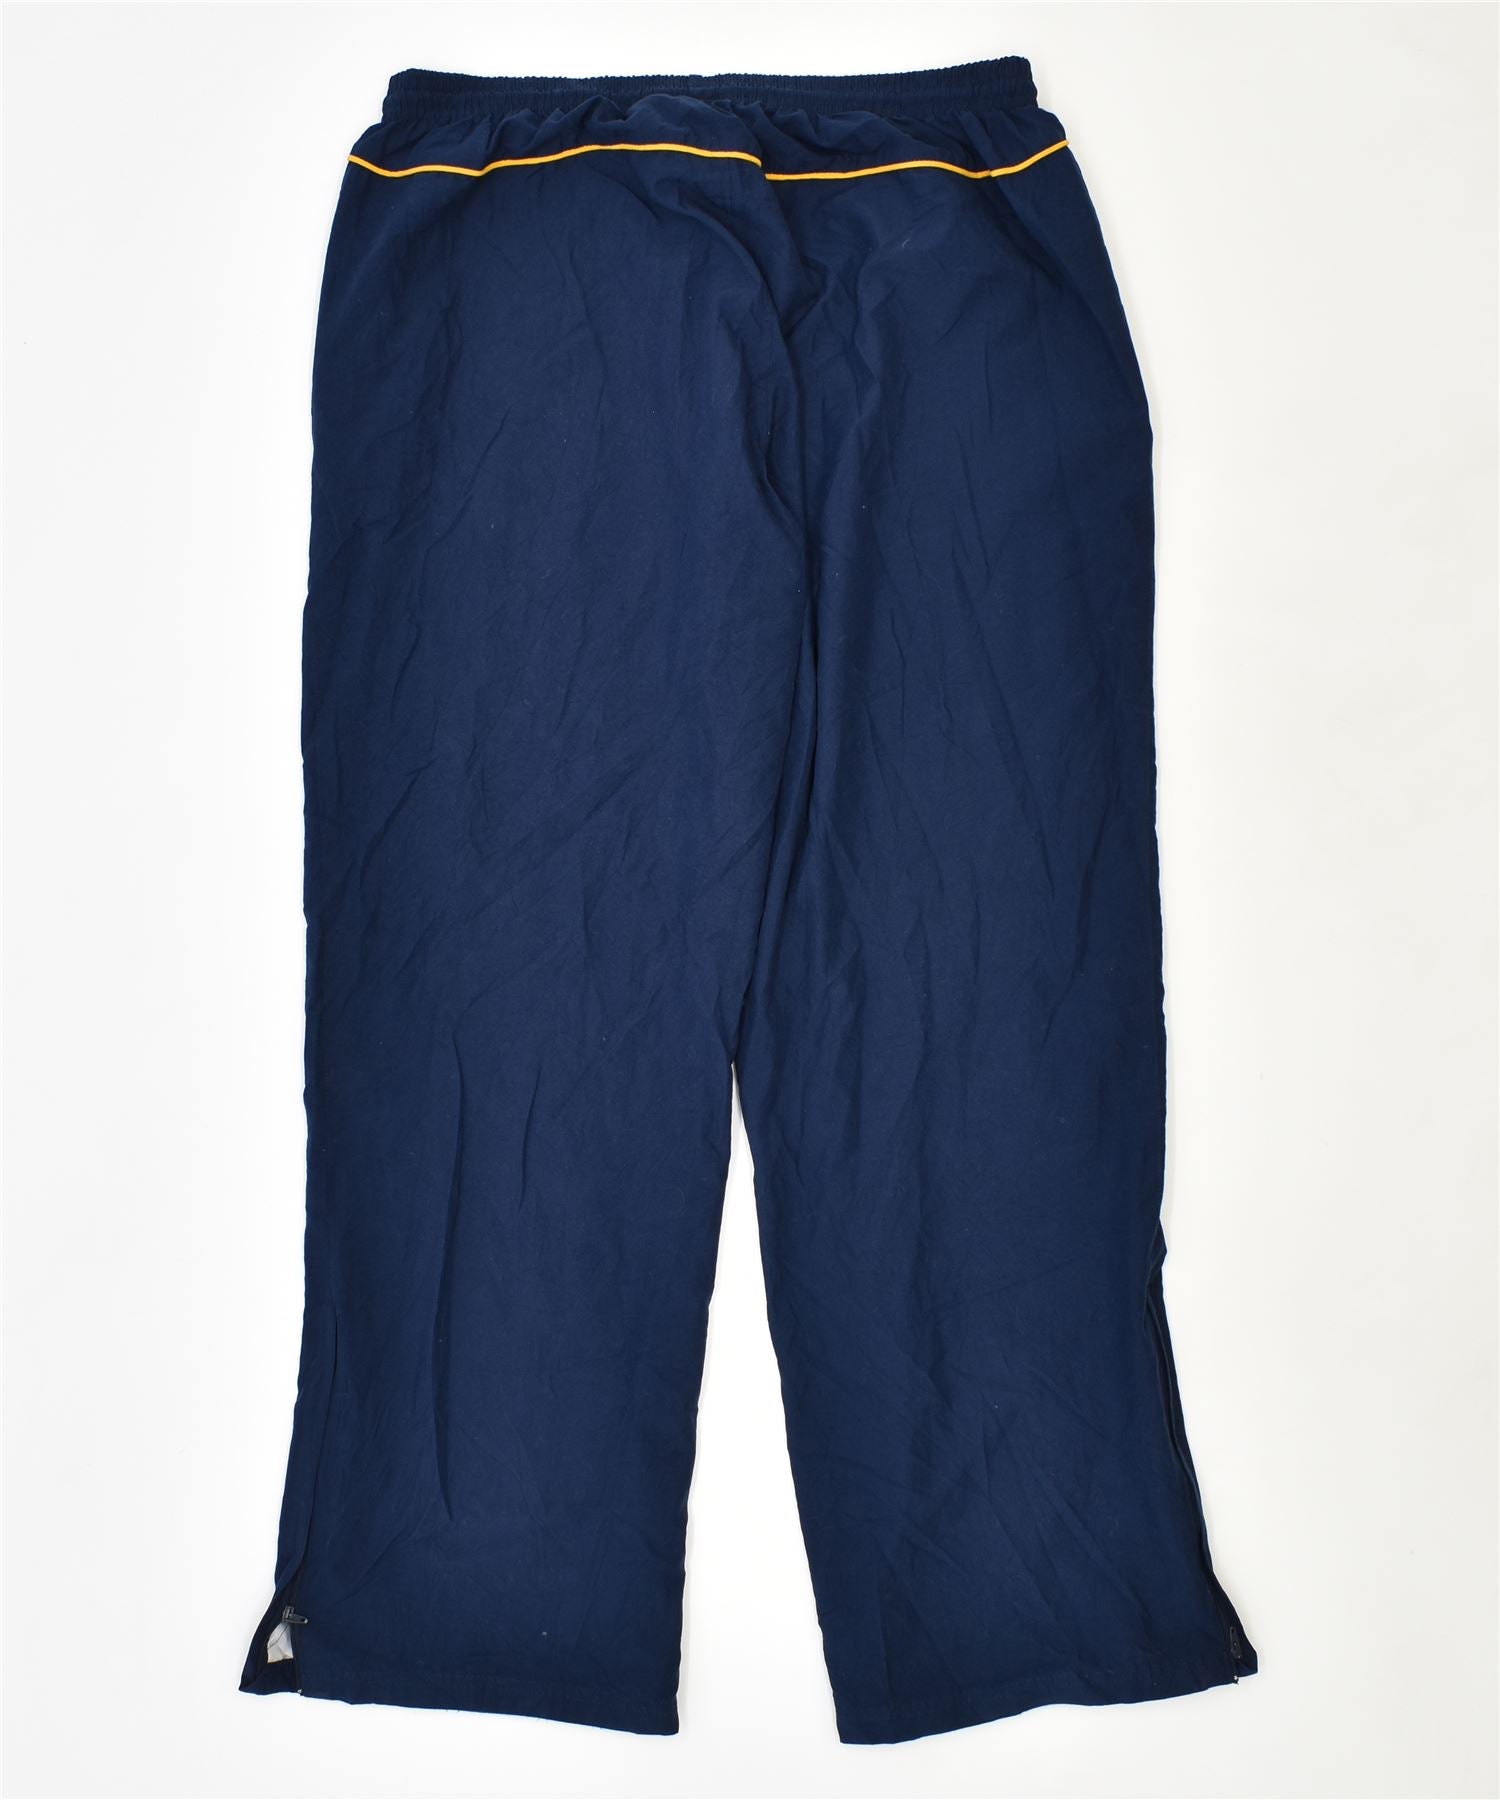 RUSSELL ATHLETIC Womens Tracksuit Trousers Joggers 2XL Navy Blue Cotton, Vintage & Second-Hand Clothing Online